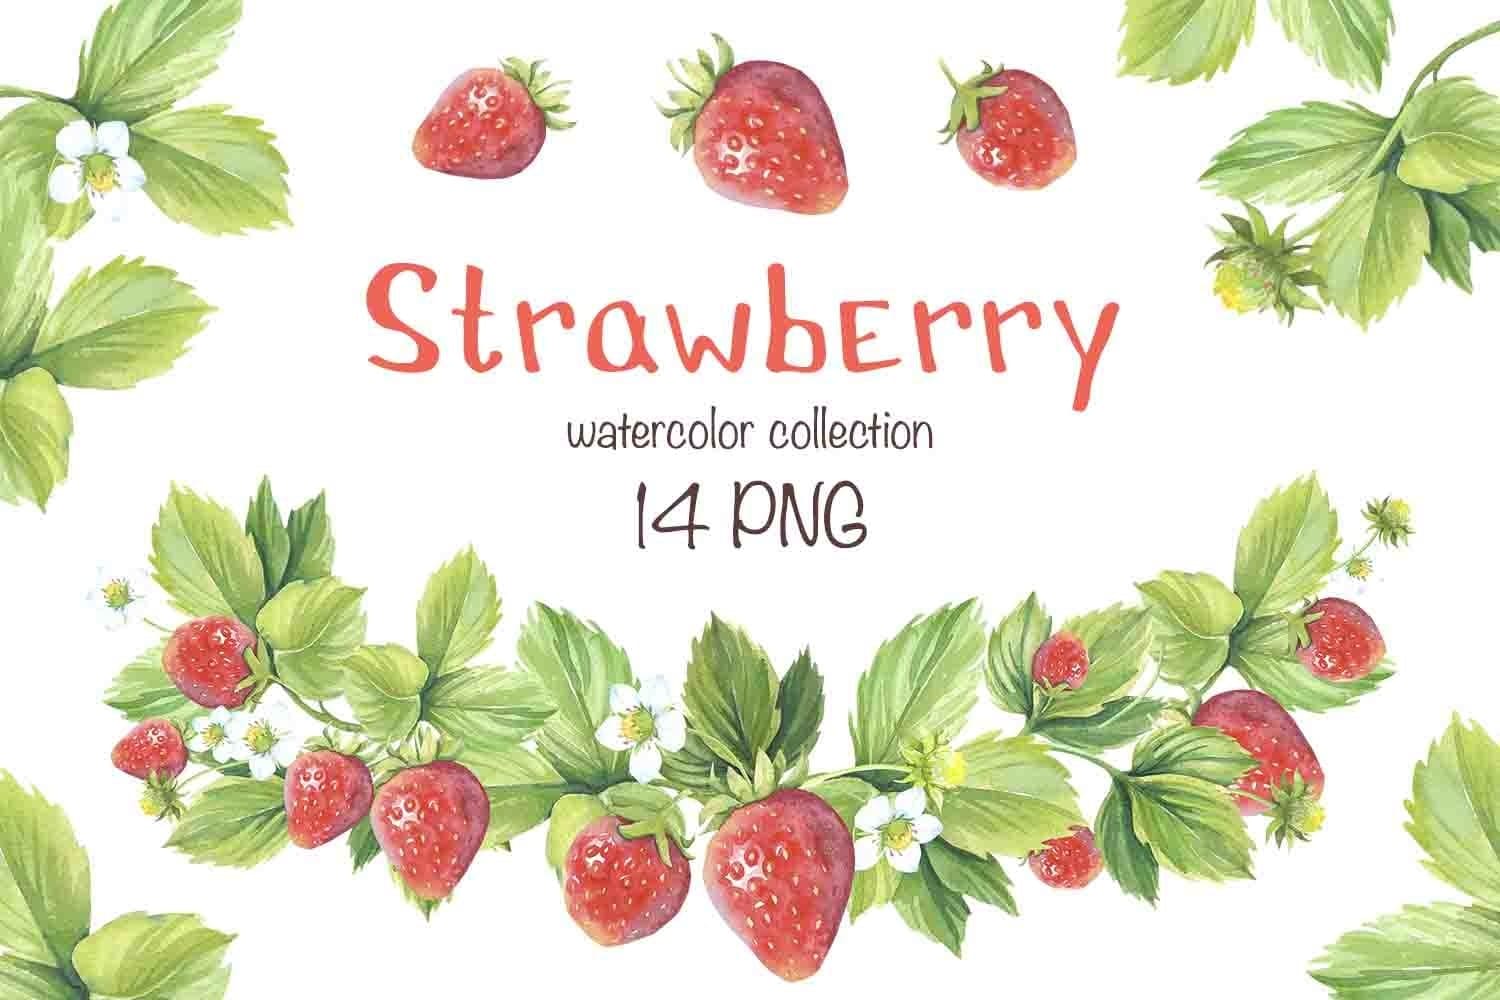 14 PNG files of Watercolor Strawberry Collection.